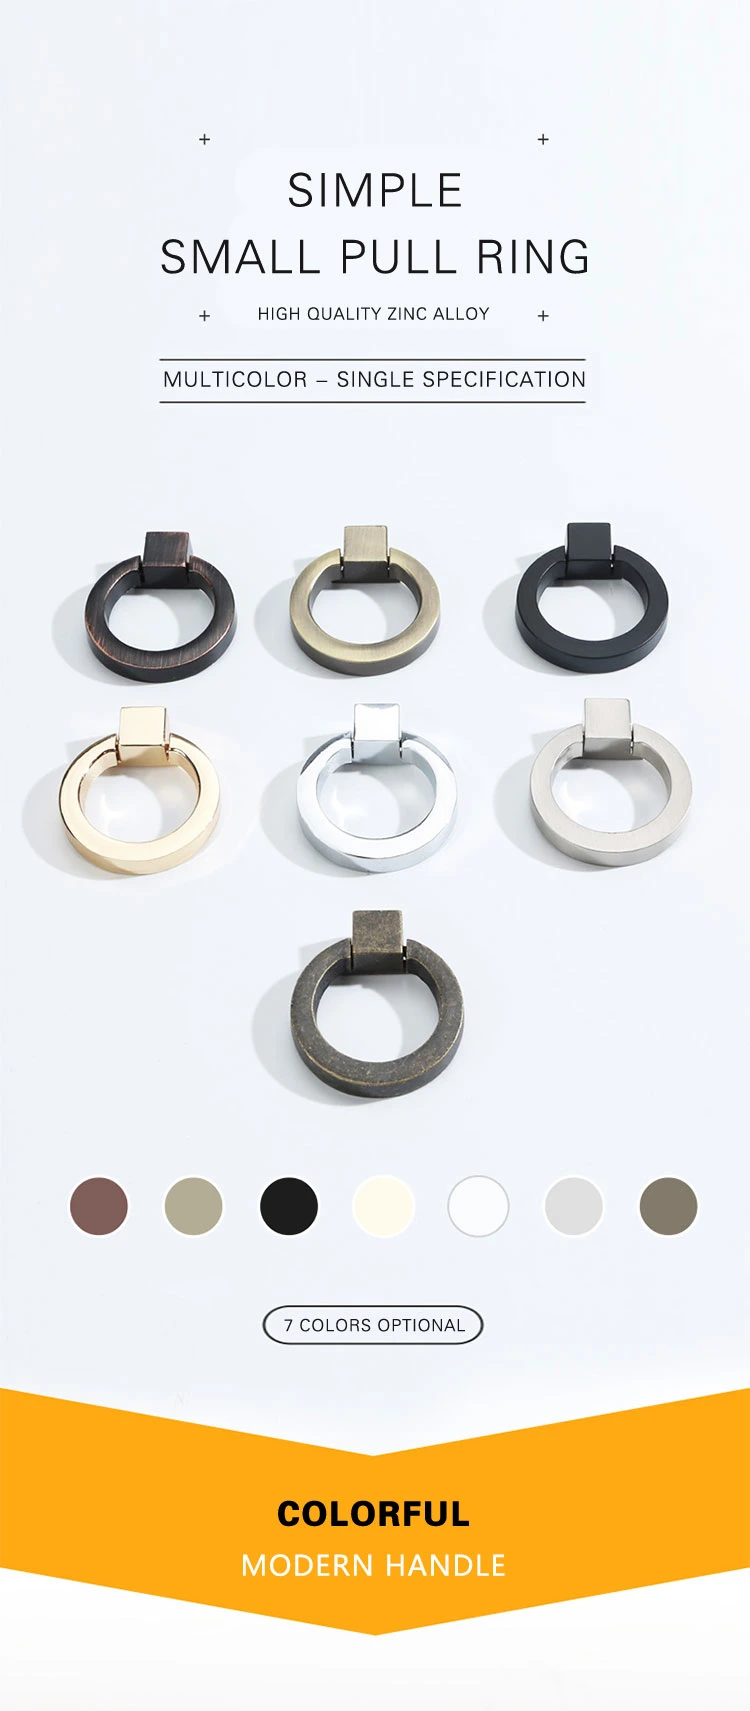 2023zinc Alloy Round Conceal Stainless Steel Ring Furniture Pull Handle Door Drawer Finger Pull Silver Metal Black Knobs Ring-Pull